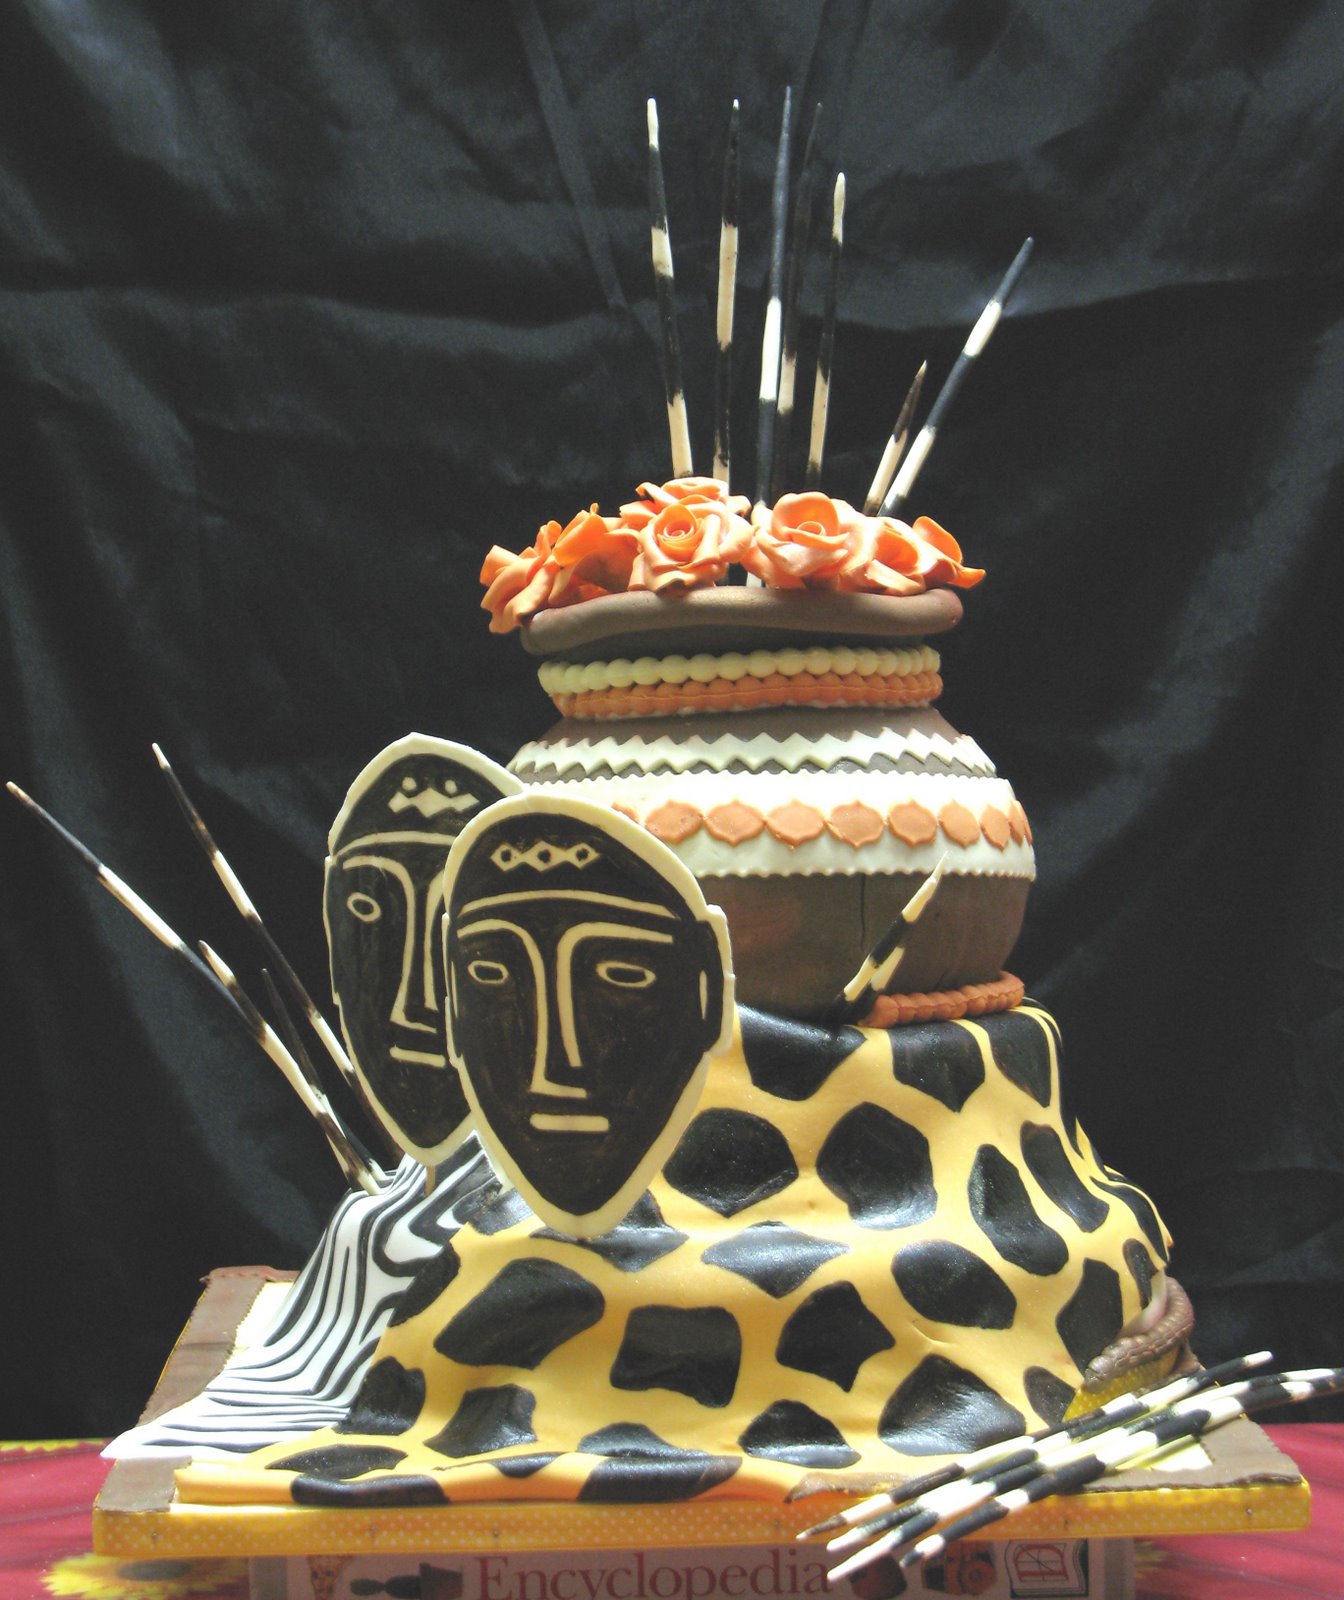 African-cake with Masks and Spears